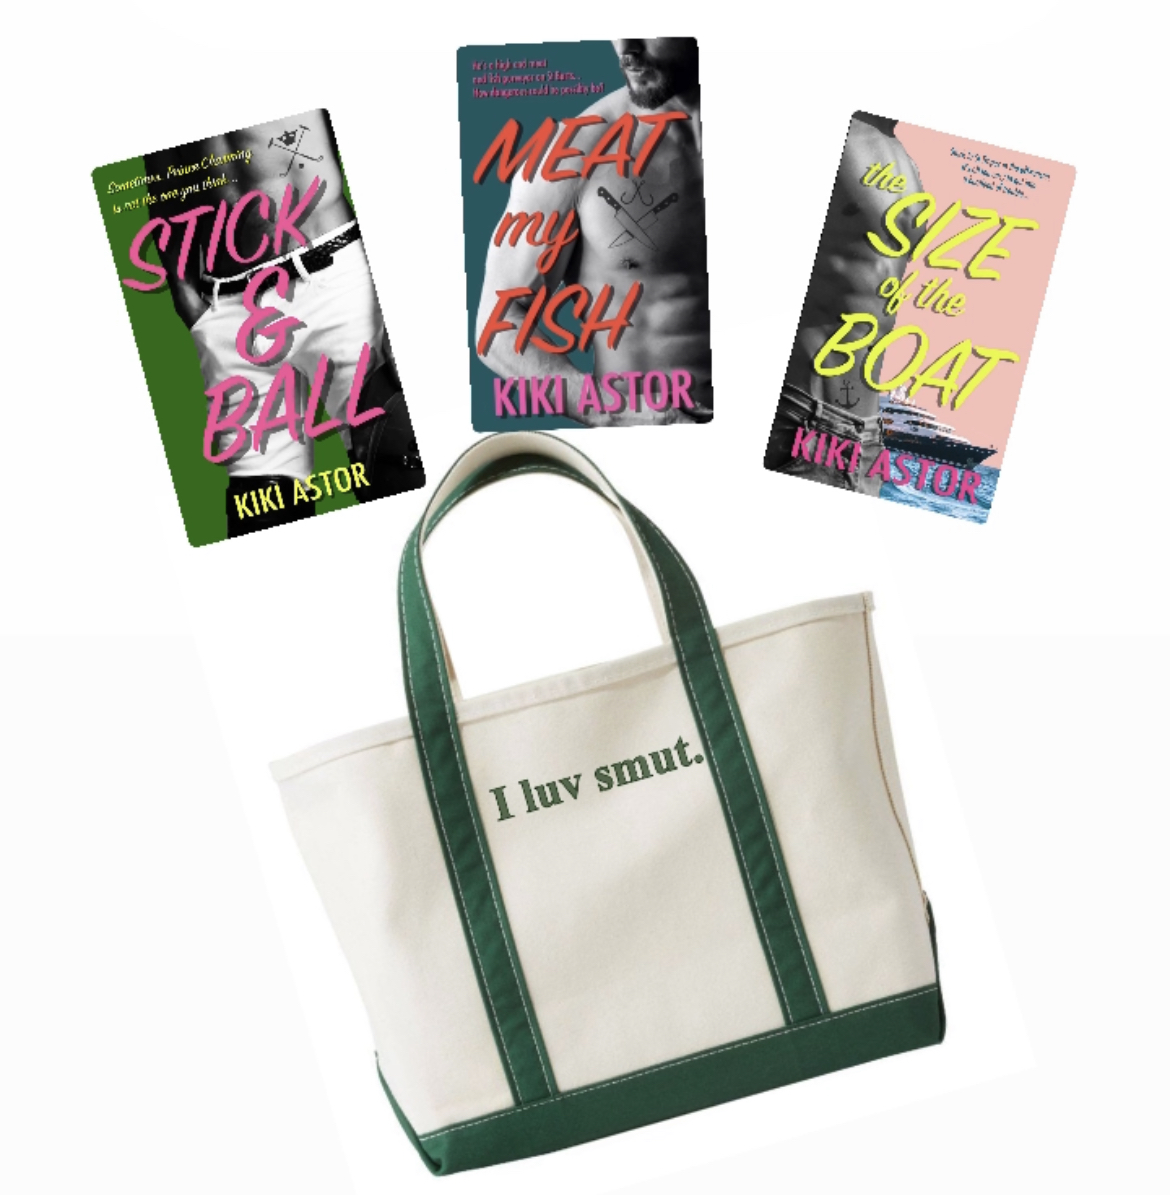 LL Bean Boat and Tote with custom embroidery reading "I luv smut" with three of Author Kiki Astor's books: Stick and Ball, Meat my Fish, and The Size of The Boat